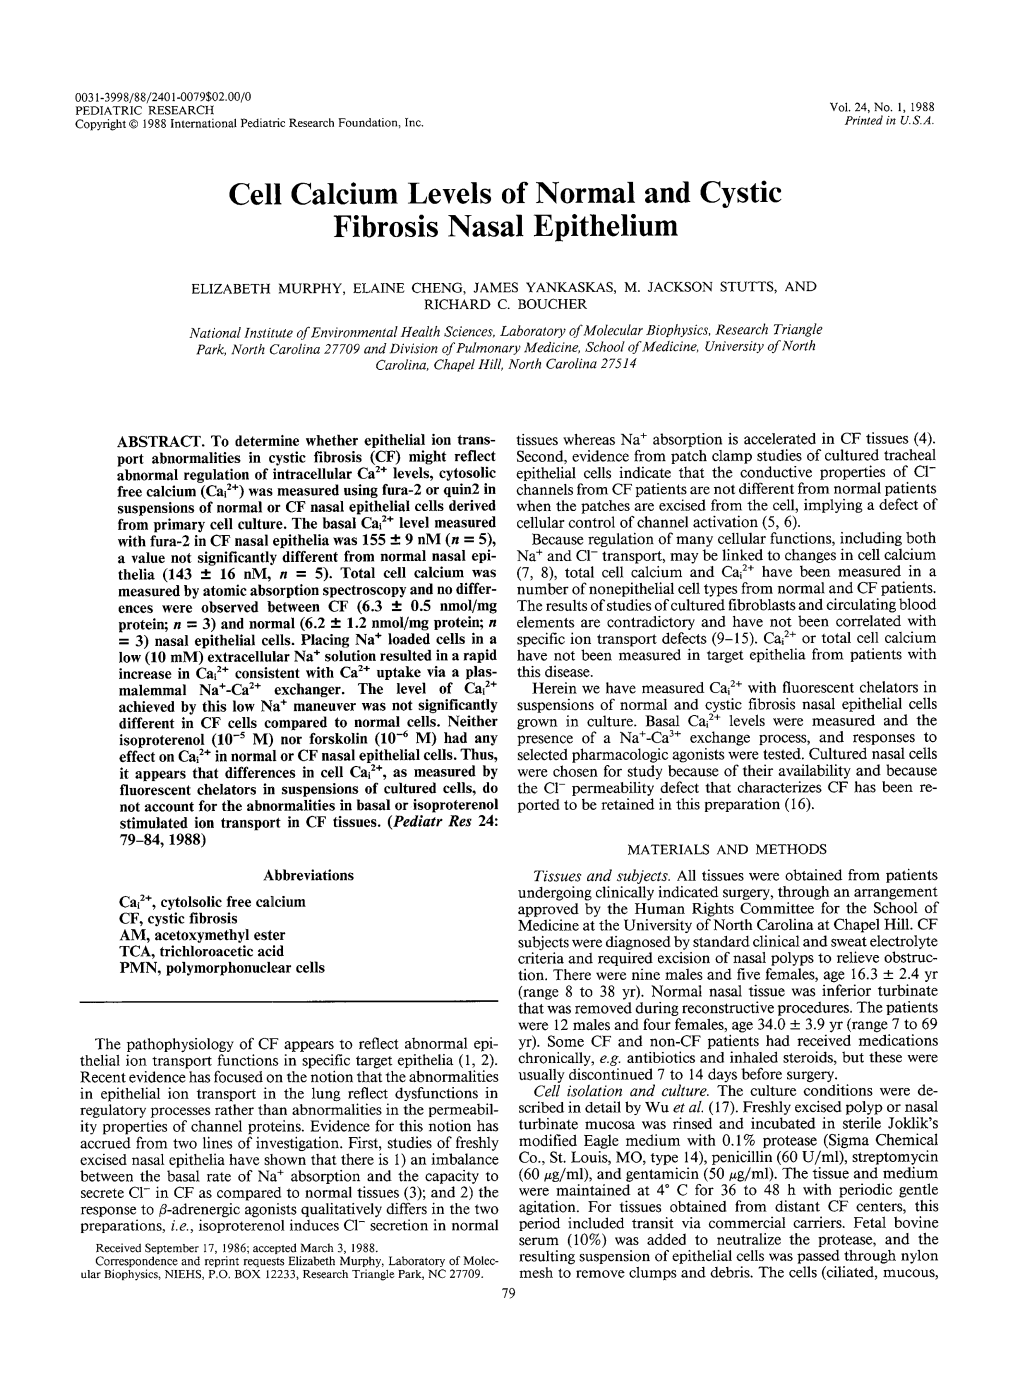 Cell Calcium Levels of Normal and Cystic Fibrosis Nasal Epithelium